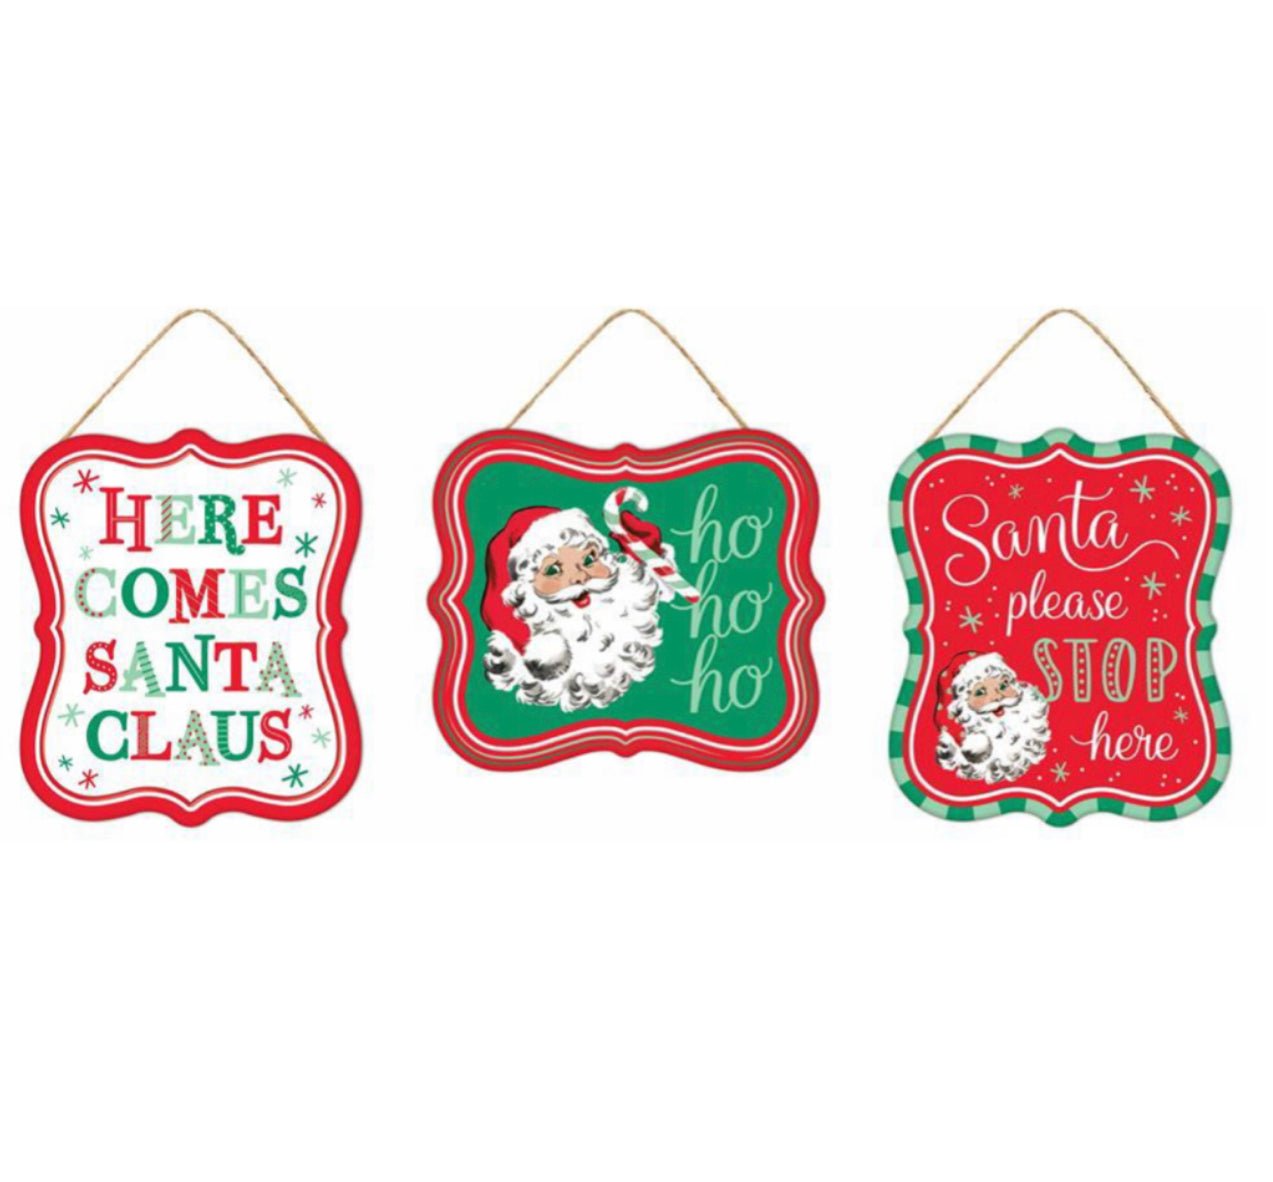 Green, red, and mint Santa swag signs x 3signs - Greenery MarketChristmasMD1213A6